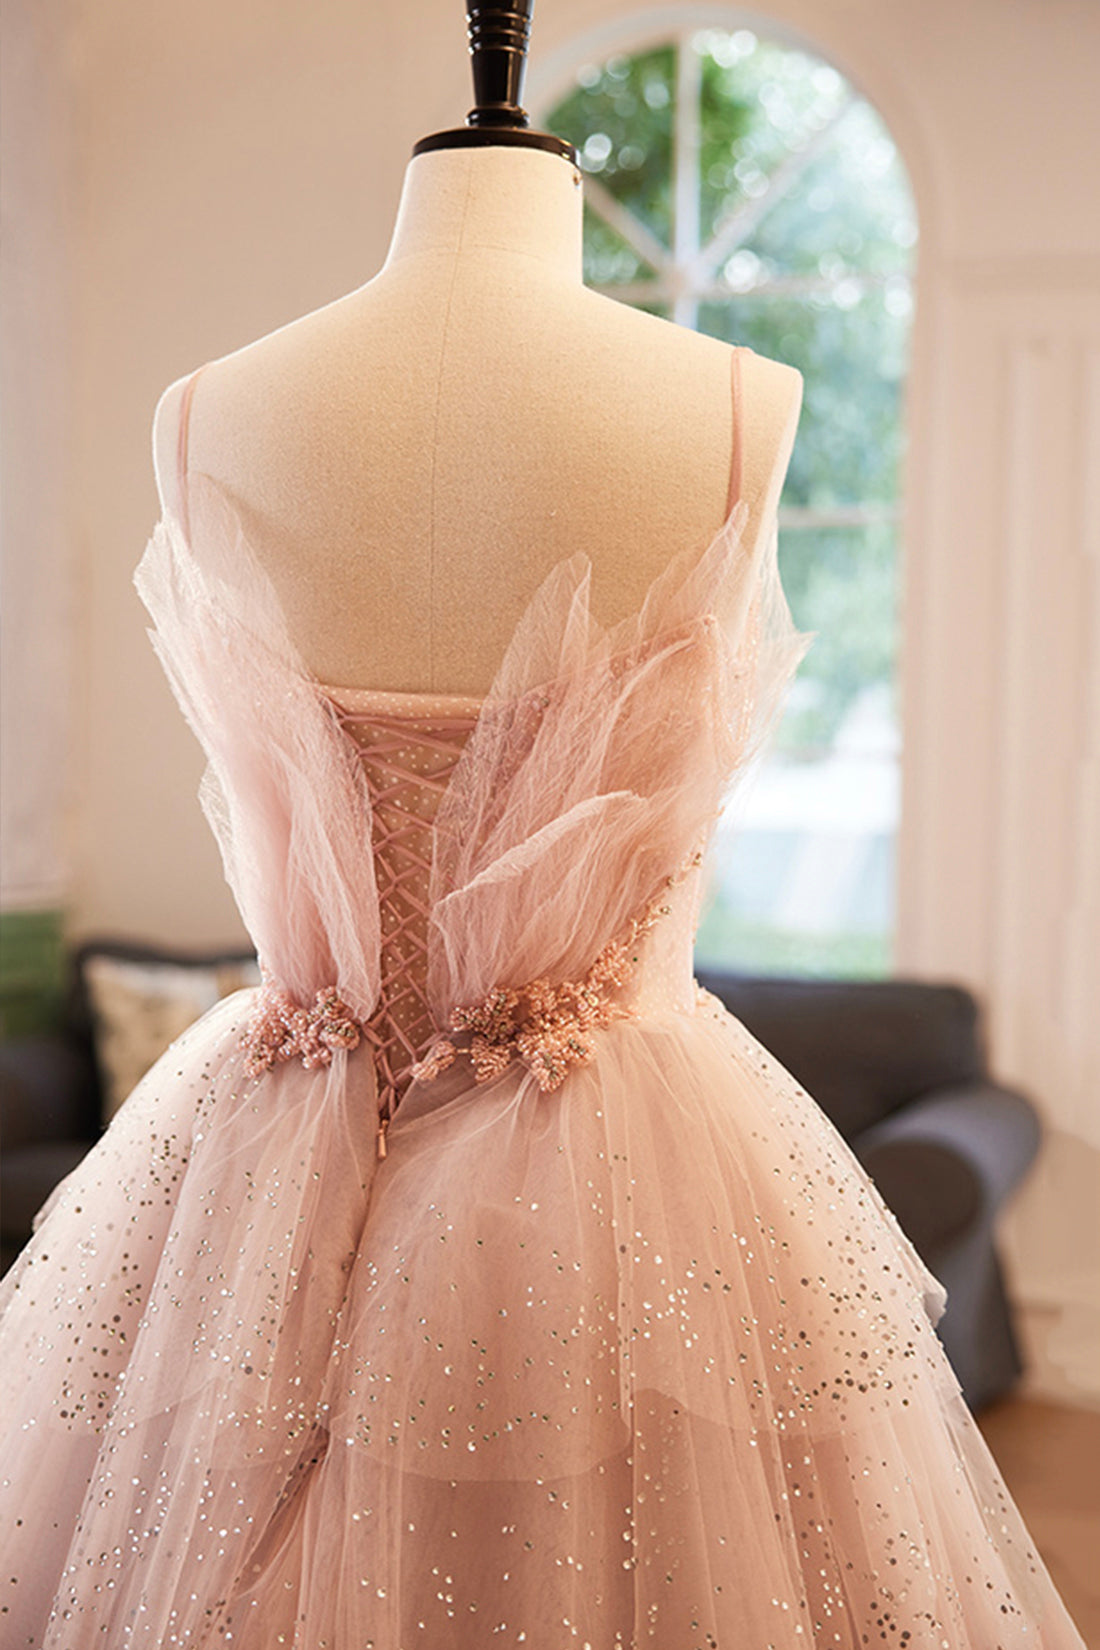 Gorgeous V Neck Beaded Layered PinkTulle Long Prom Dresses, A-Line Evening Party Dresses